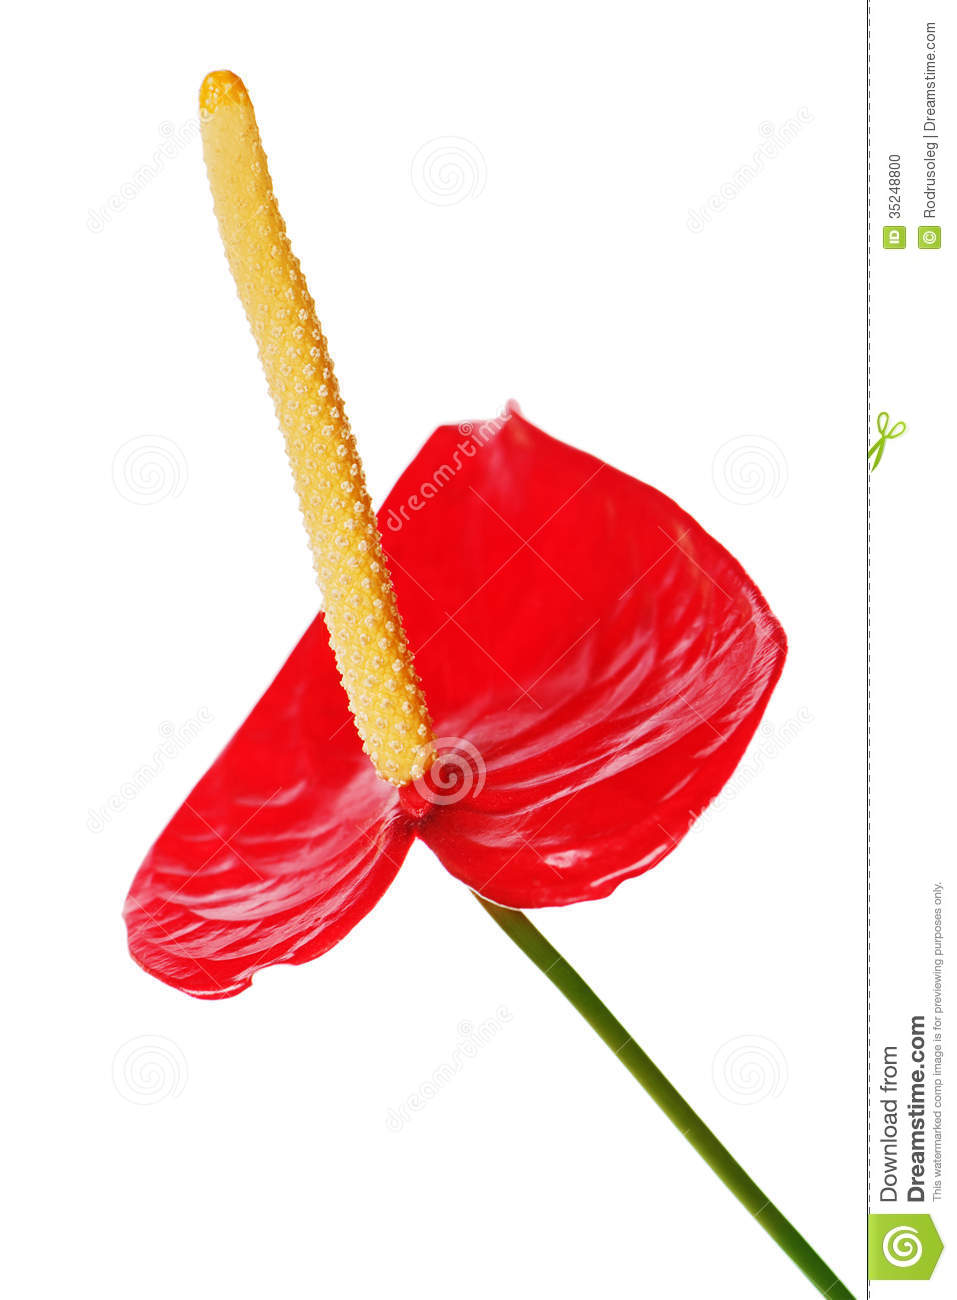 Anthurium clipart #9, Download drawings